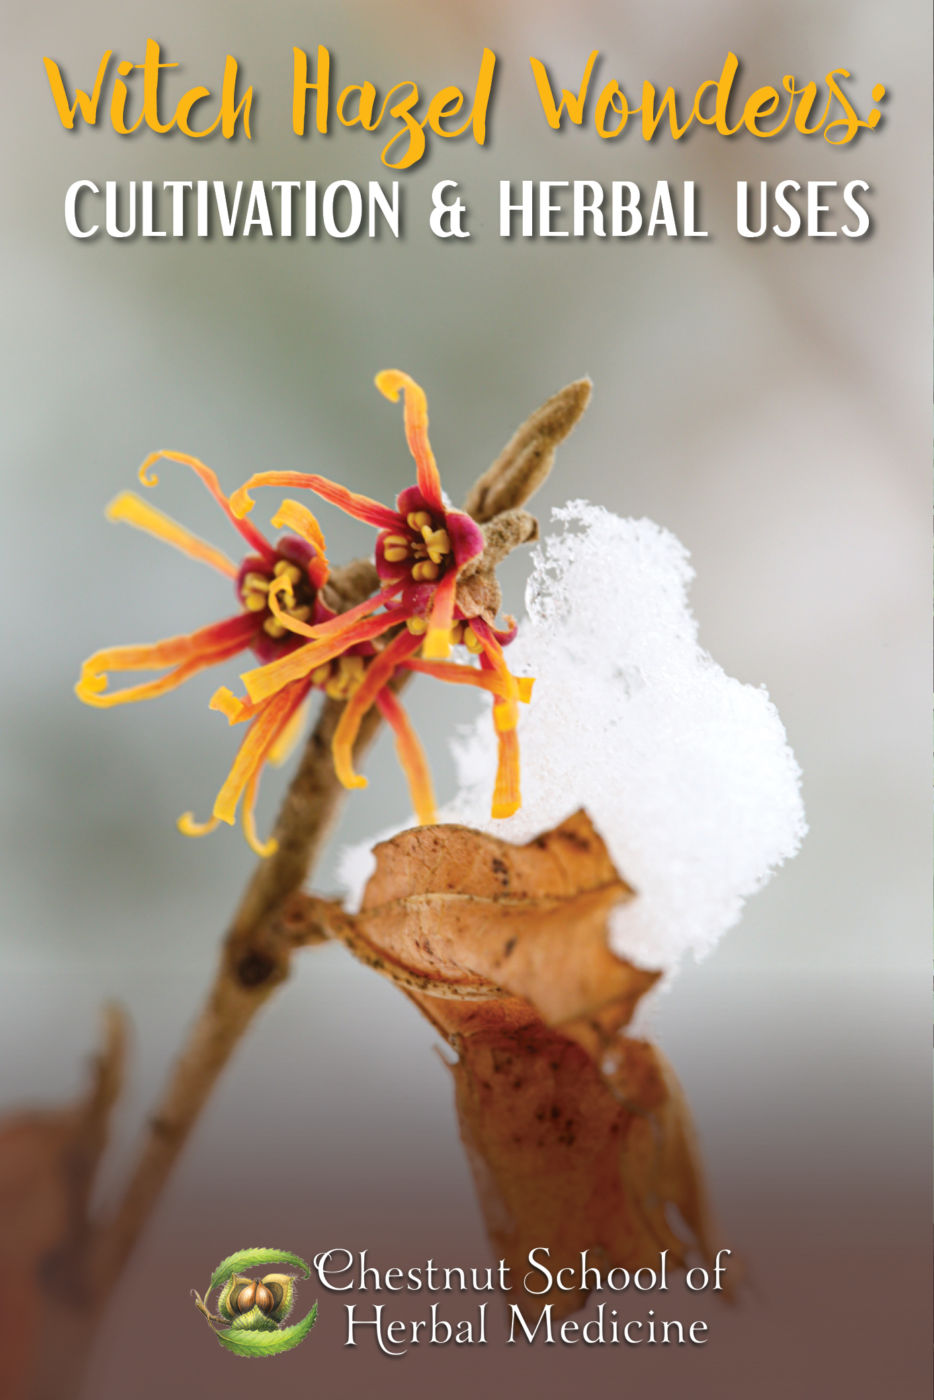 Witch Hazel Wonders: Cultivation & Herbal Uses